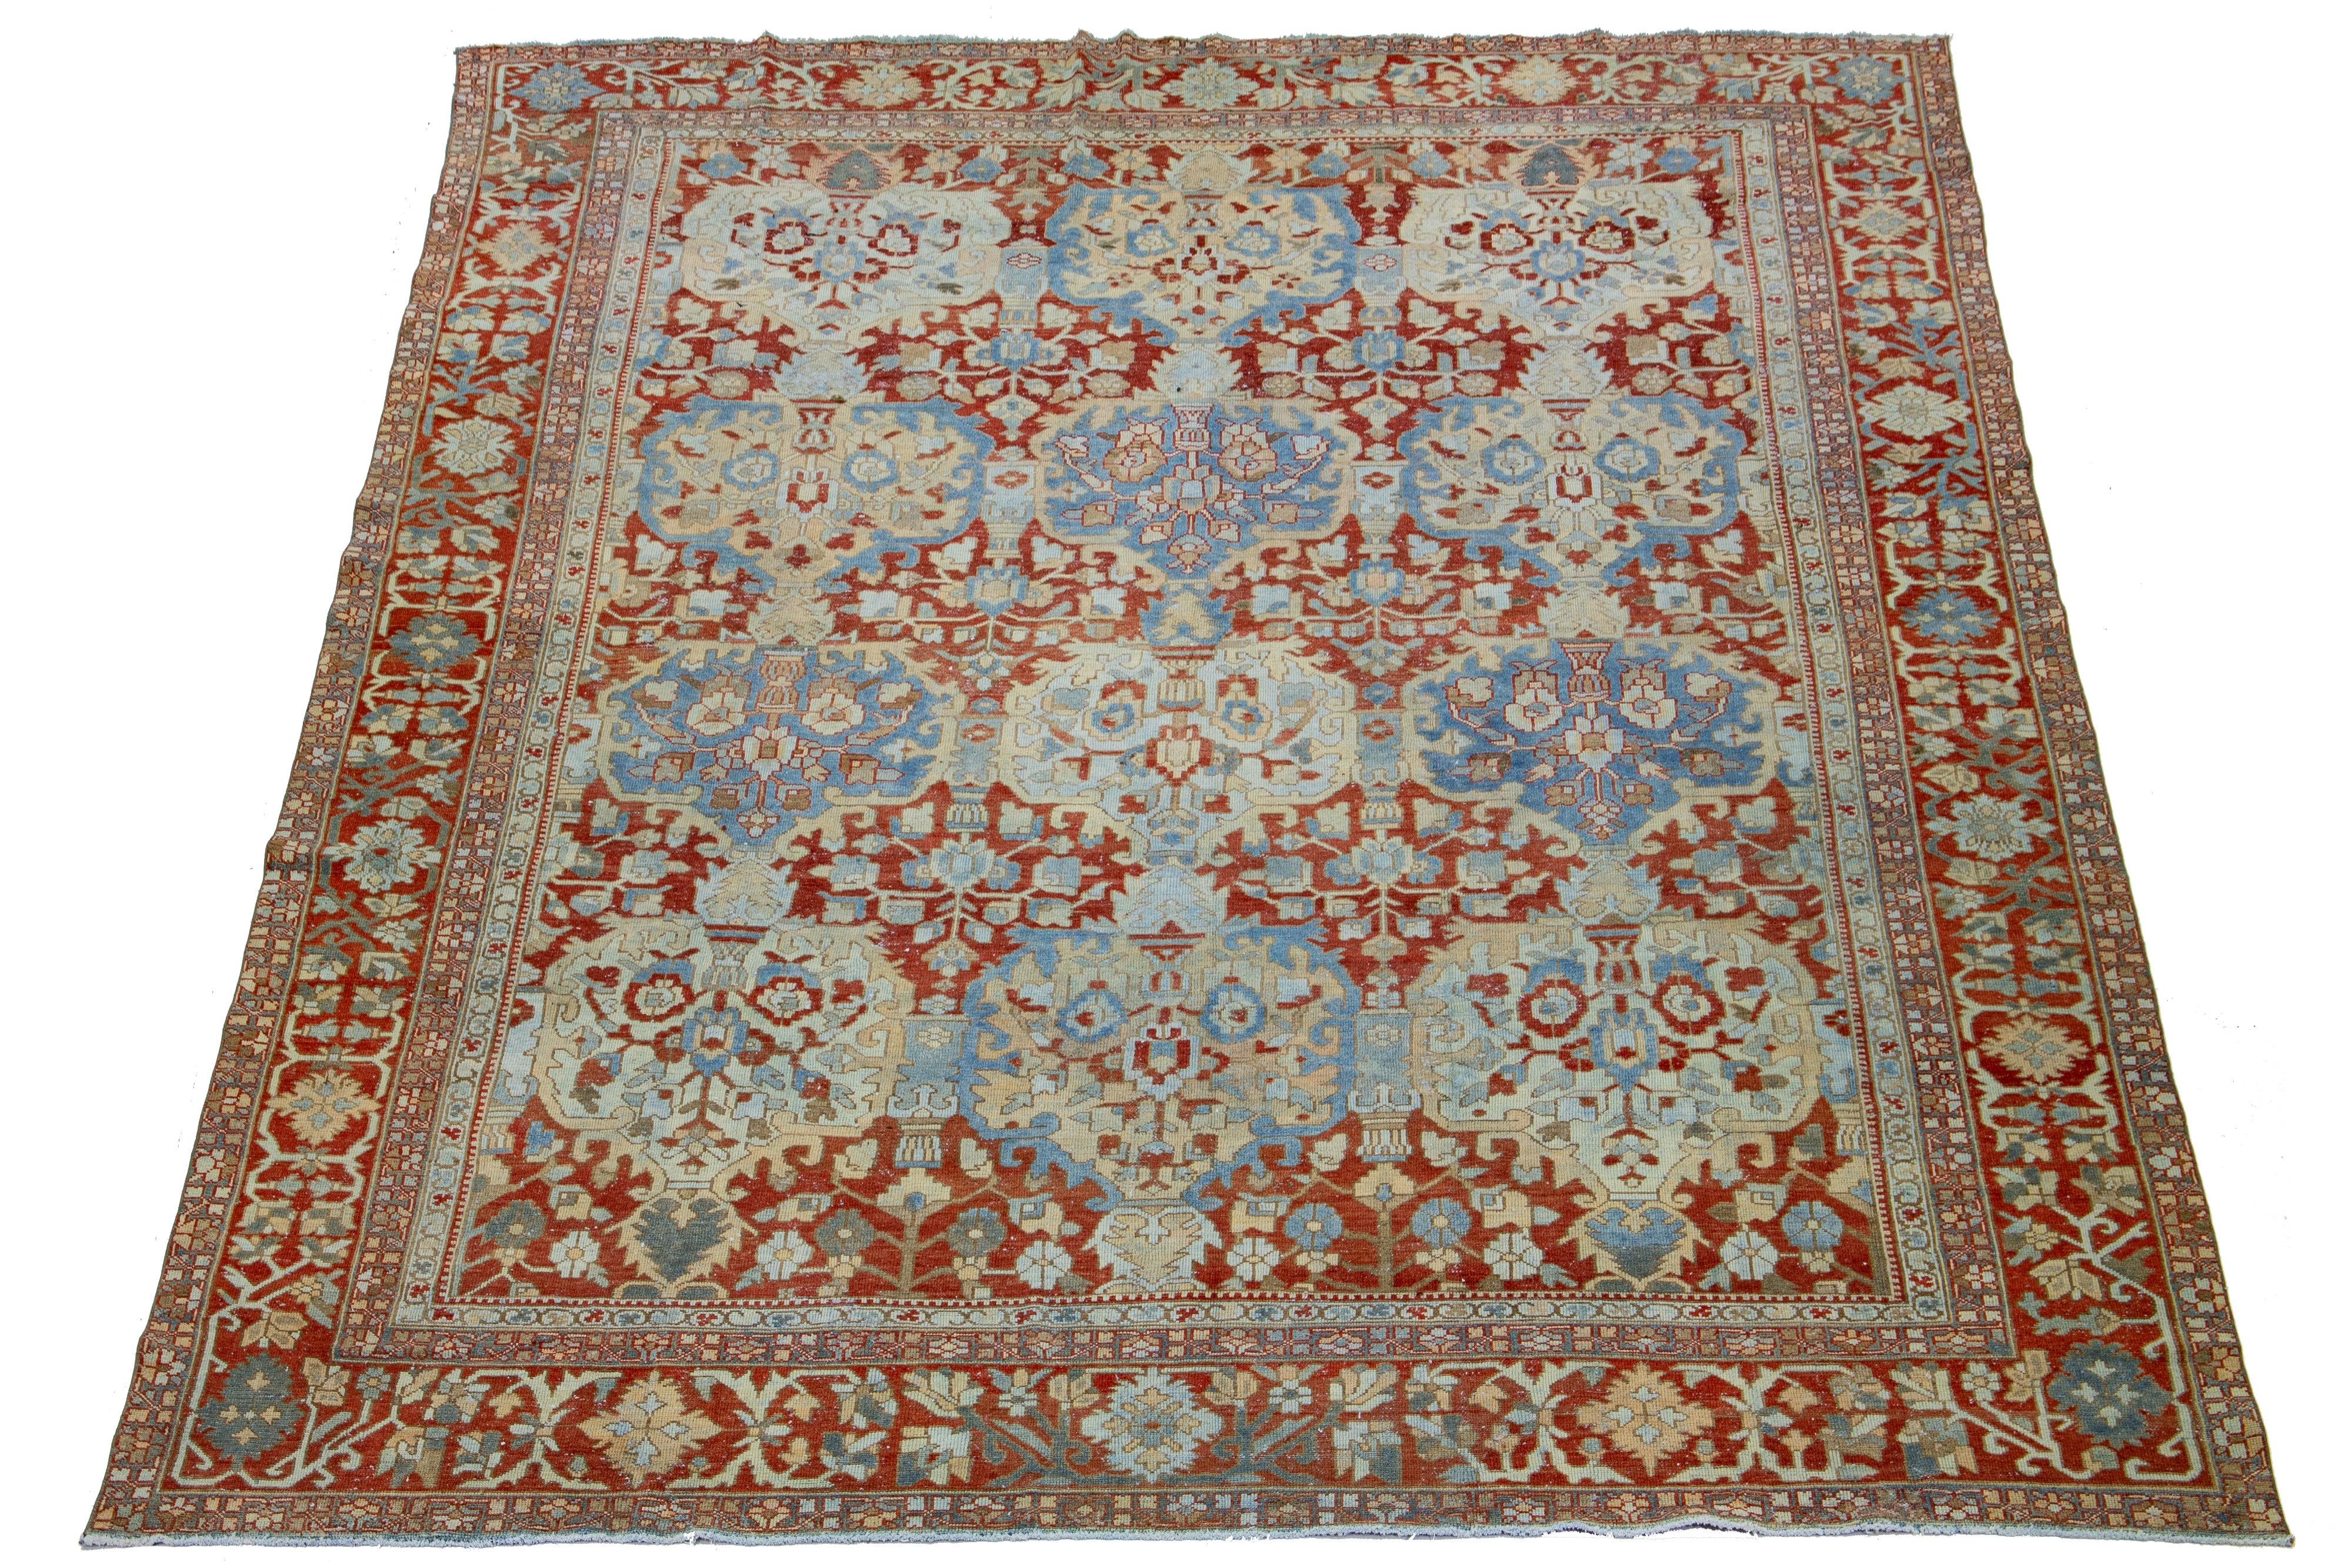 Beautiful Antique Bakhtiari hand-knotted wool rug with a red-rust color field. This Persian piece has blue and peach hues on a classic floral pattern.

This rug measures 12'5